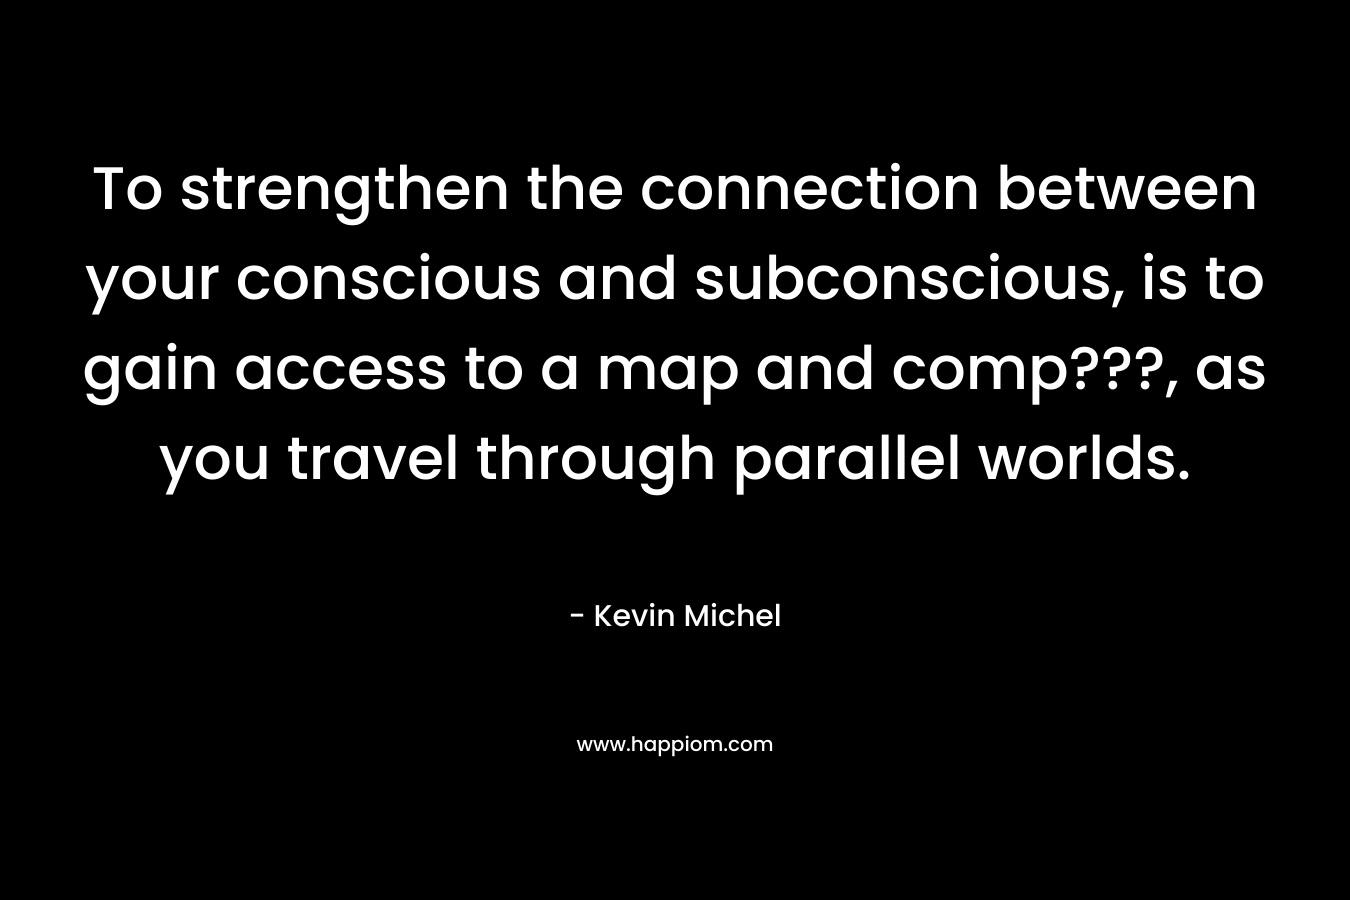 To strengthen the connection between your conscious and subconscious, is to gain access to a map and comp???, as you travel through parallel worlds. – Kevin Michel